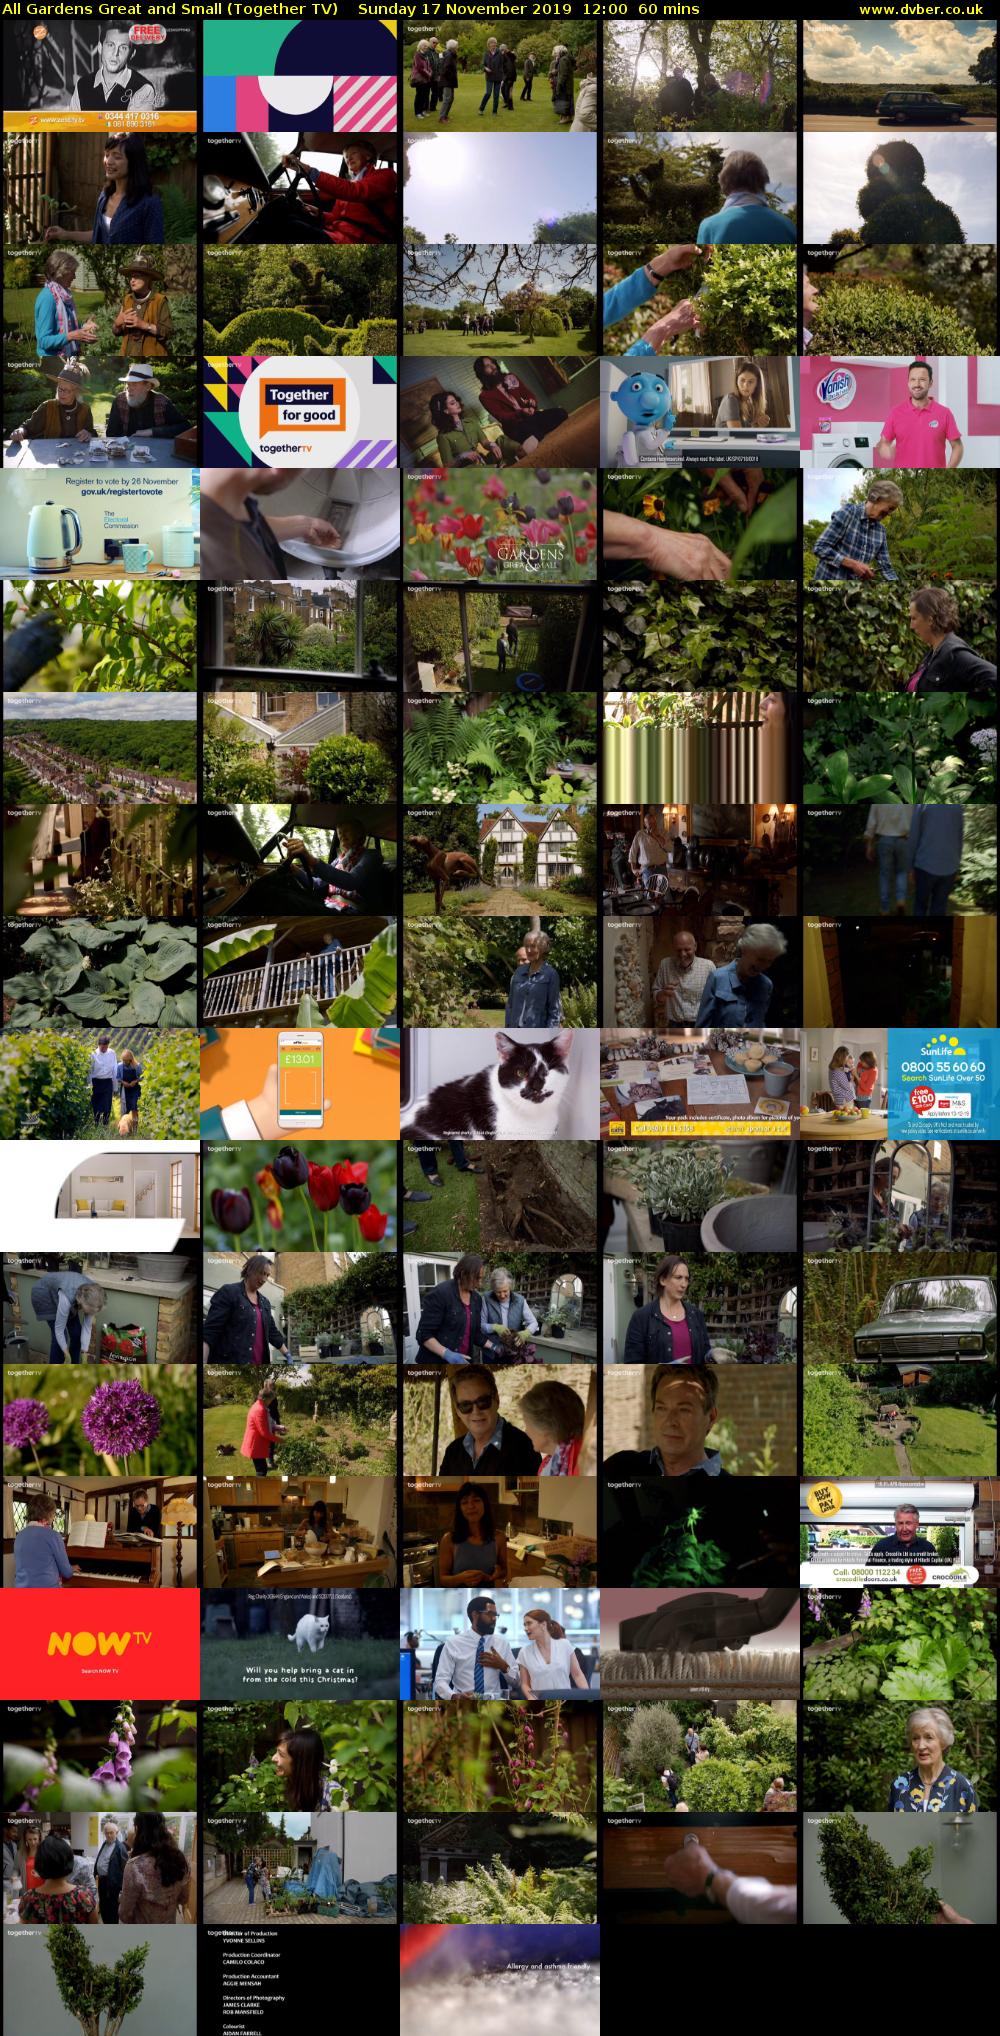 All Gardens Great and Small (Together TV) Sunday 17 November 2019 12:00 - 13:00